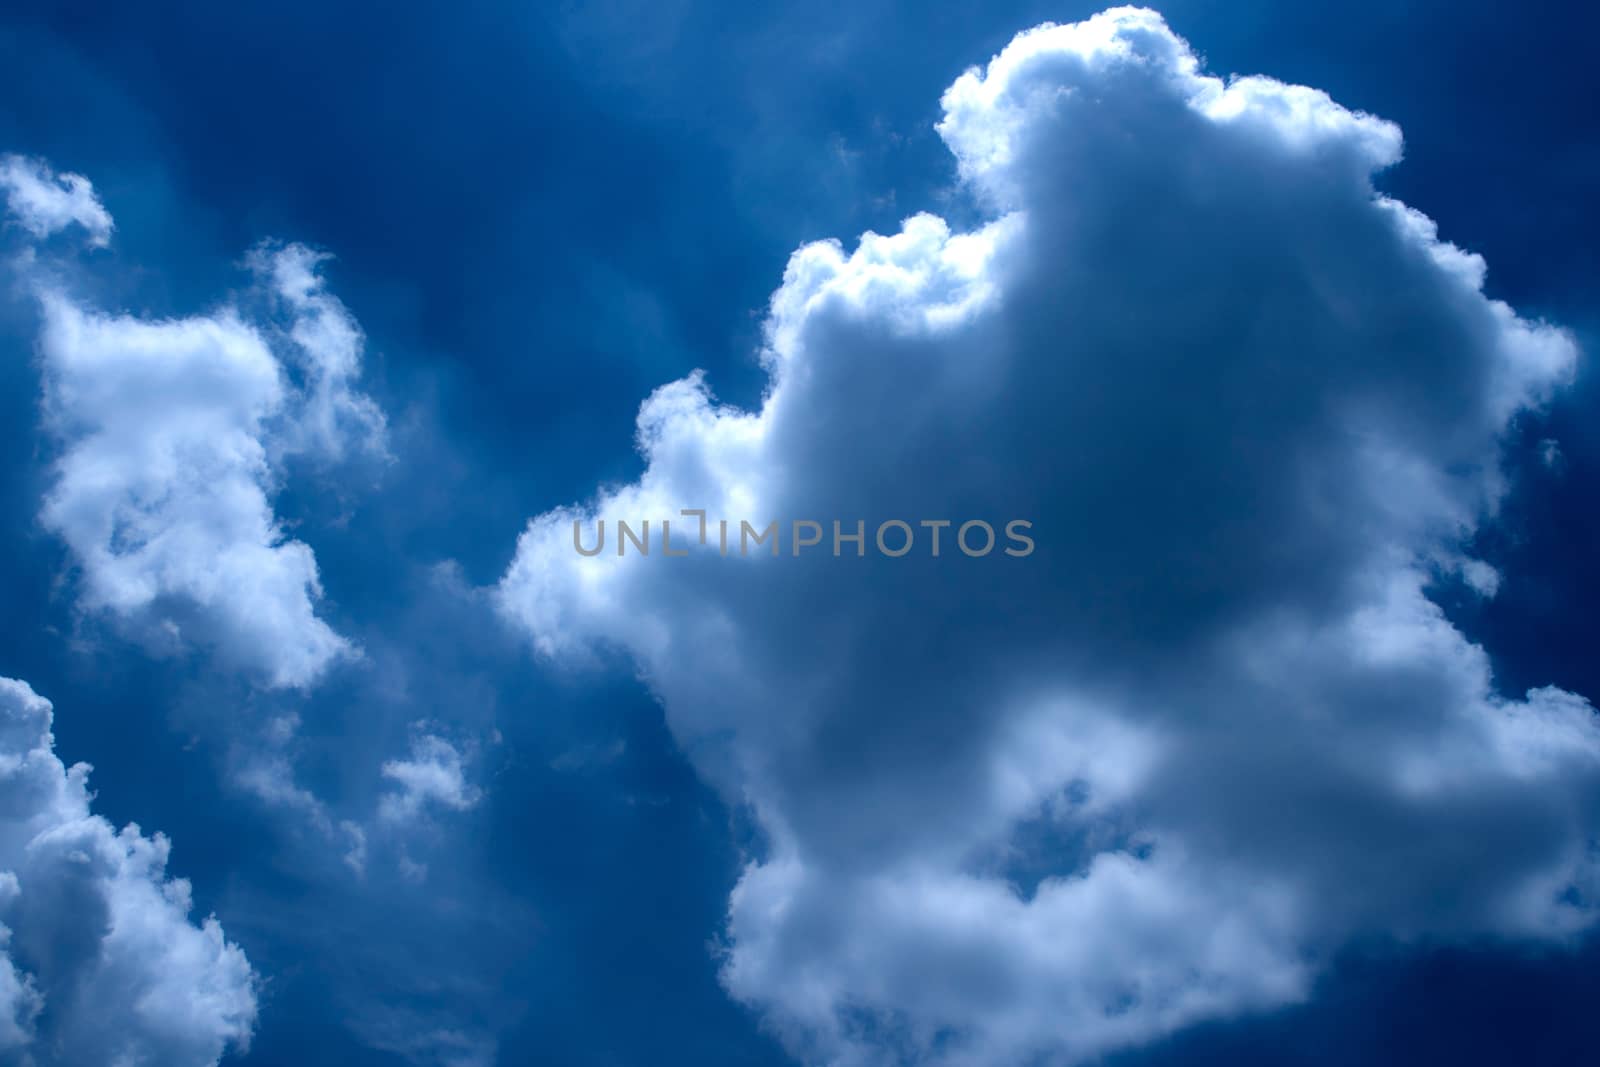 The Cloud in deep Blue Sky with the Sunshine